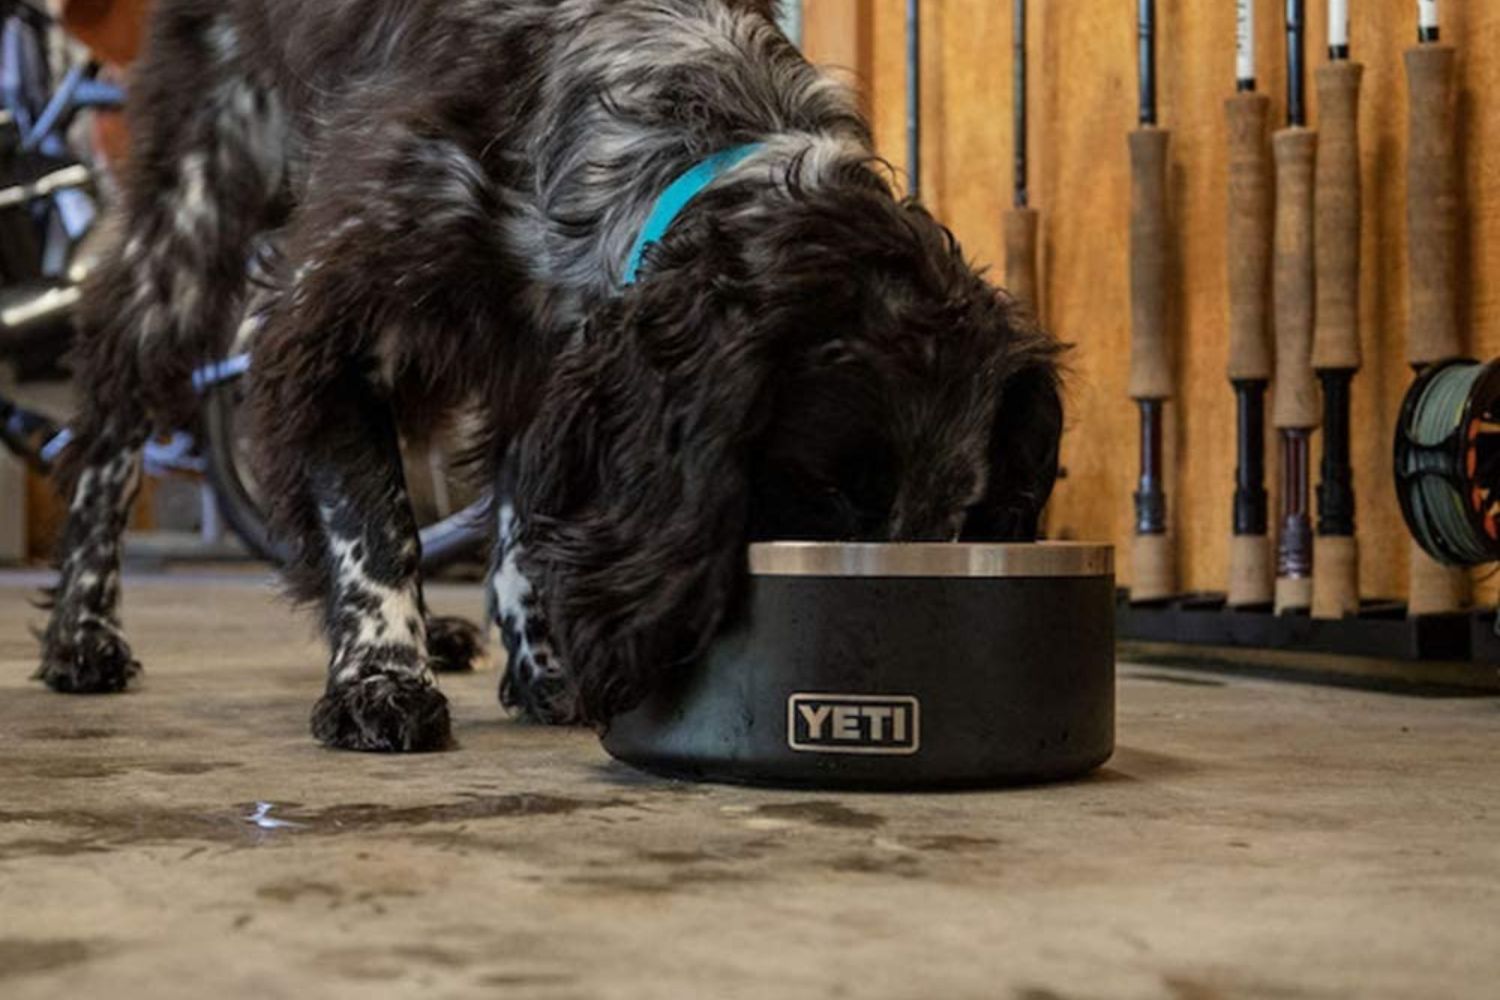 The Best Yeti Products Options: Yeti Boomer 8 Stainless Steel Dog Bowl